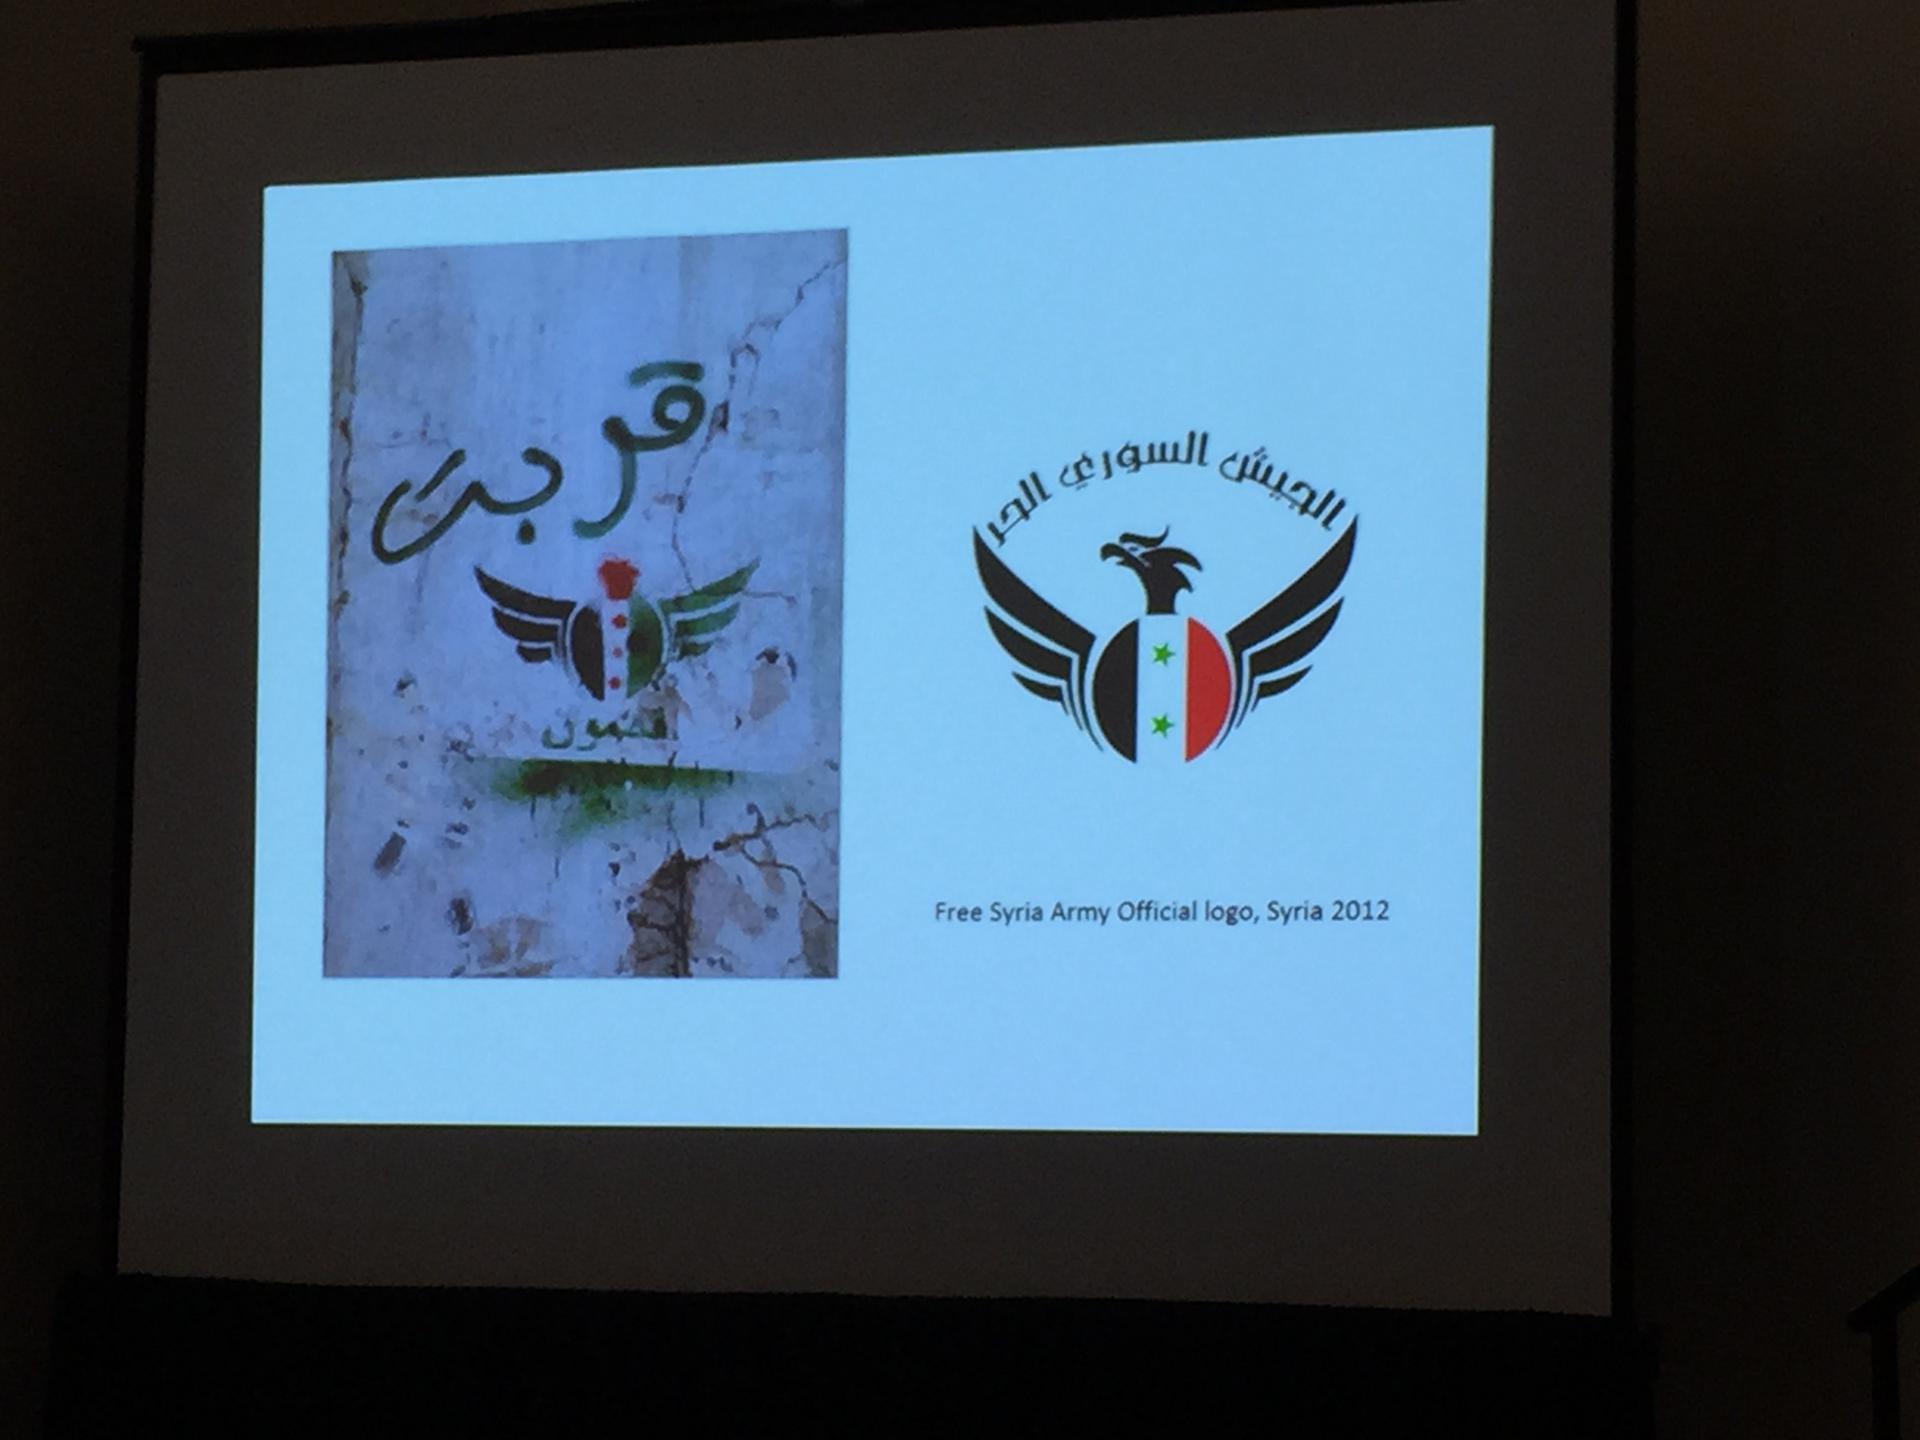 Picture of the presention taken during Elliott Goat's SXSW talk showing the Free Syria Army's designed logo.